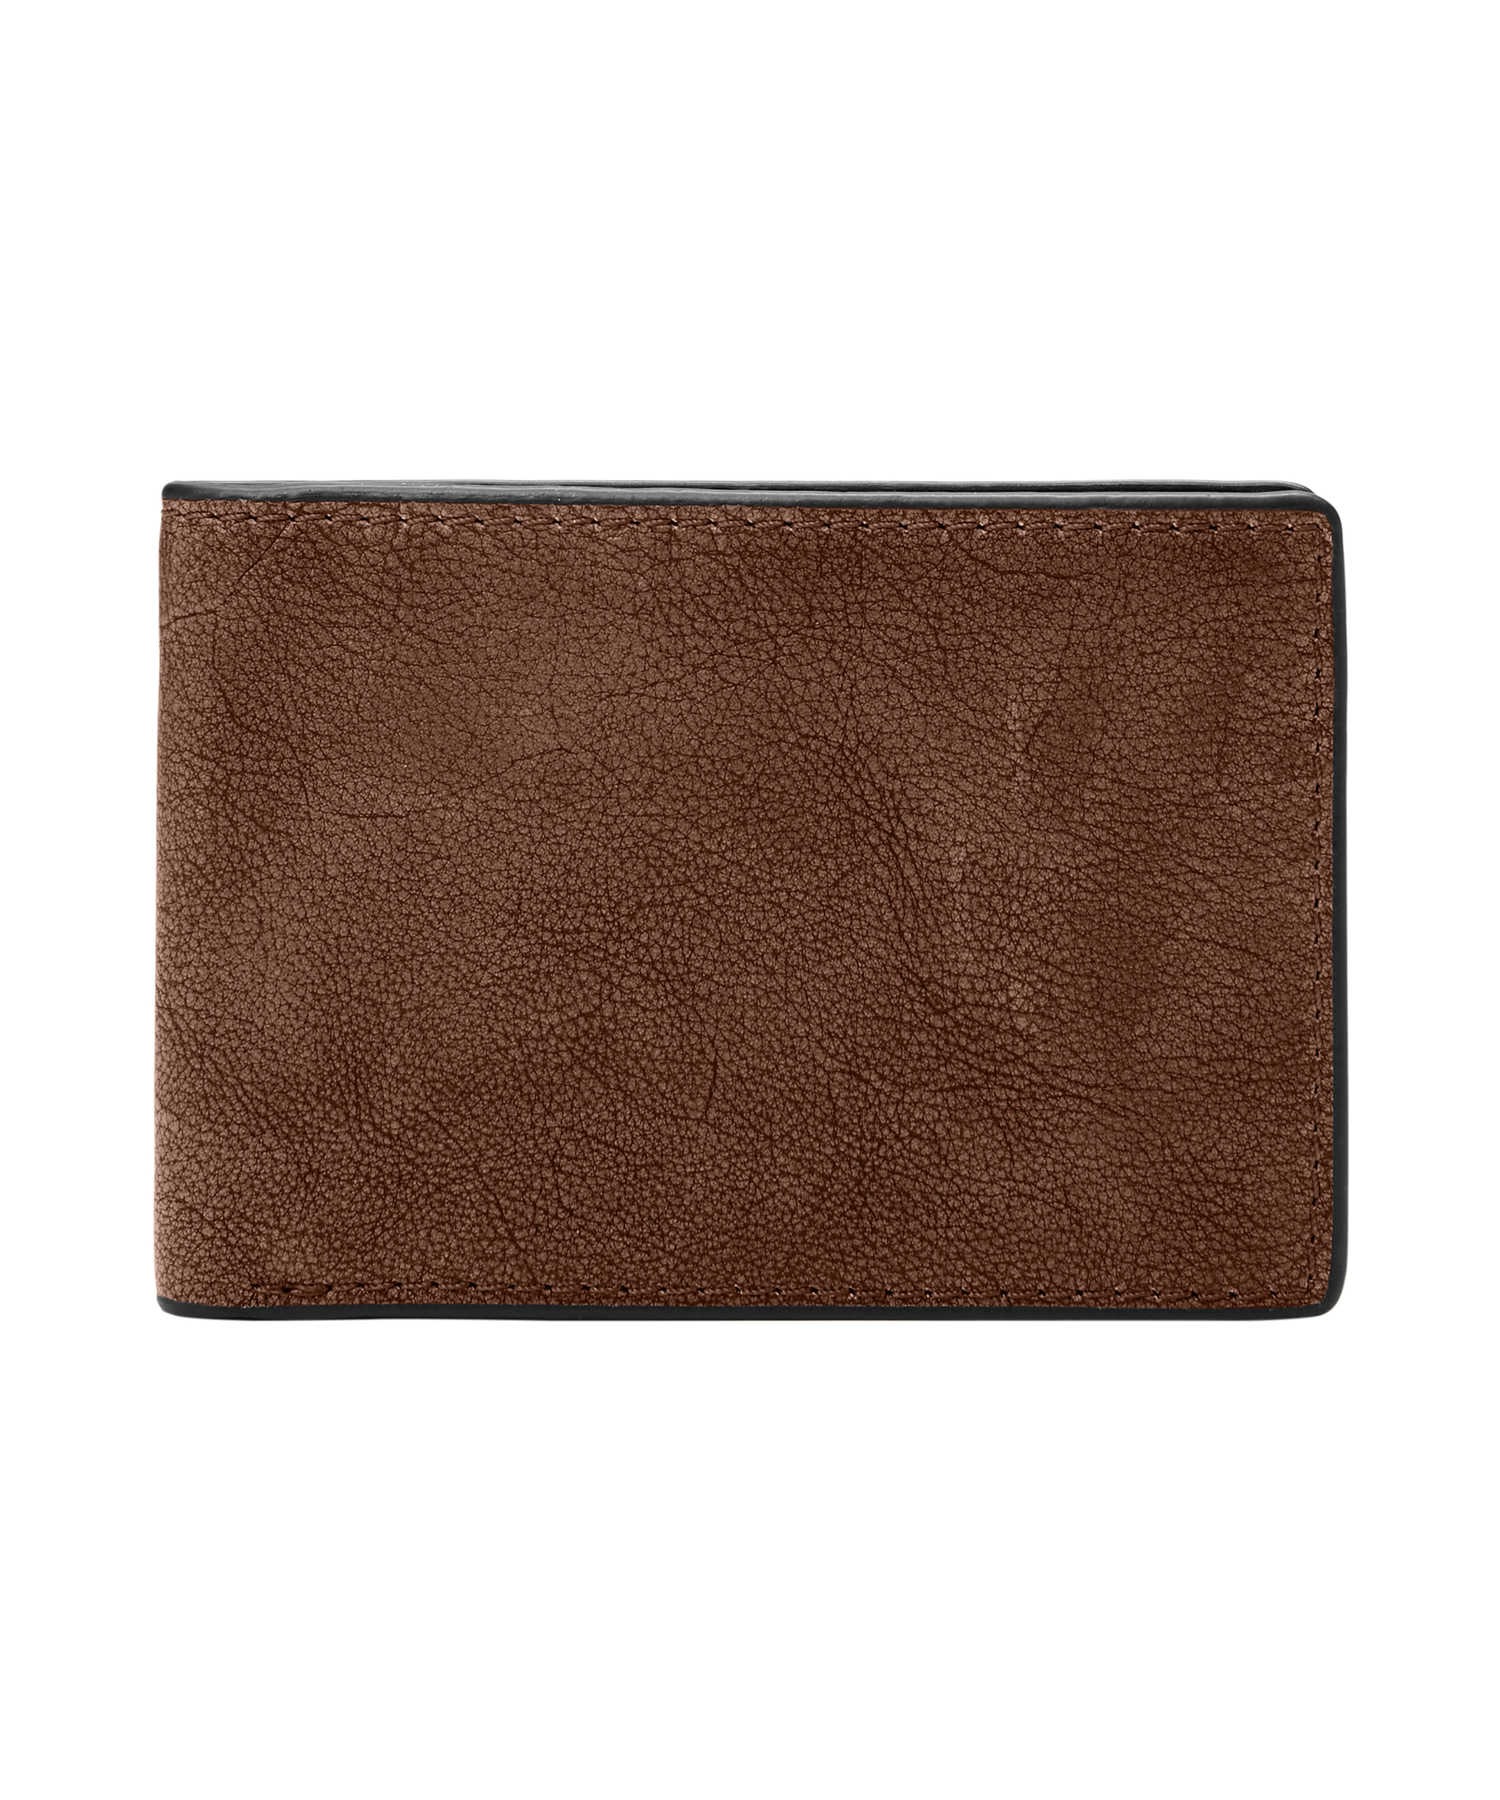 FOSSILSTEVEN FRONT POCKET 最新入荷 ML4396210 【受注生産品】 WALLET